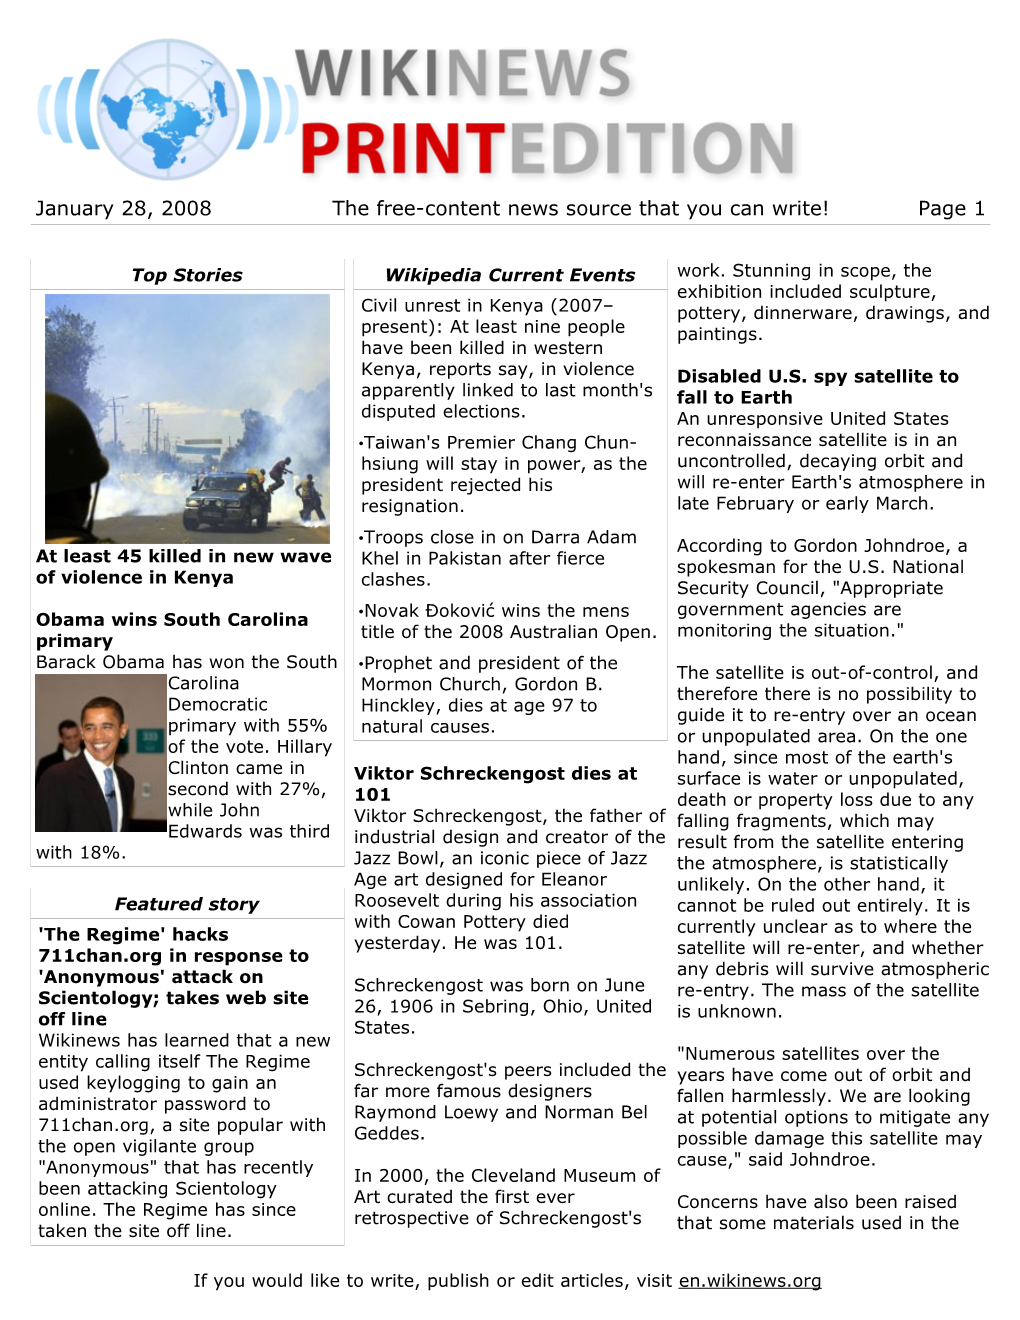 January 28, 2008 the Free-Content News Source That You Can Write! Page 1